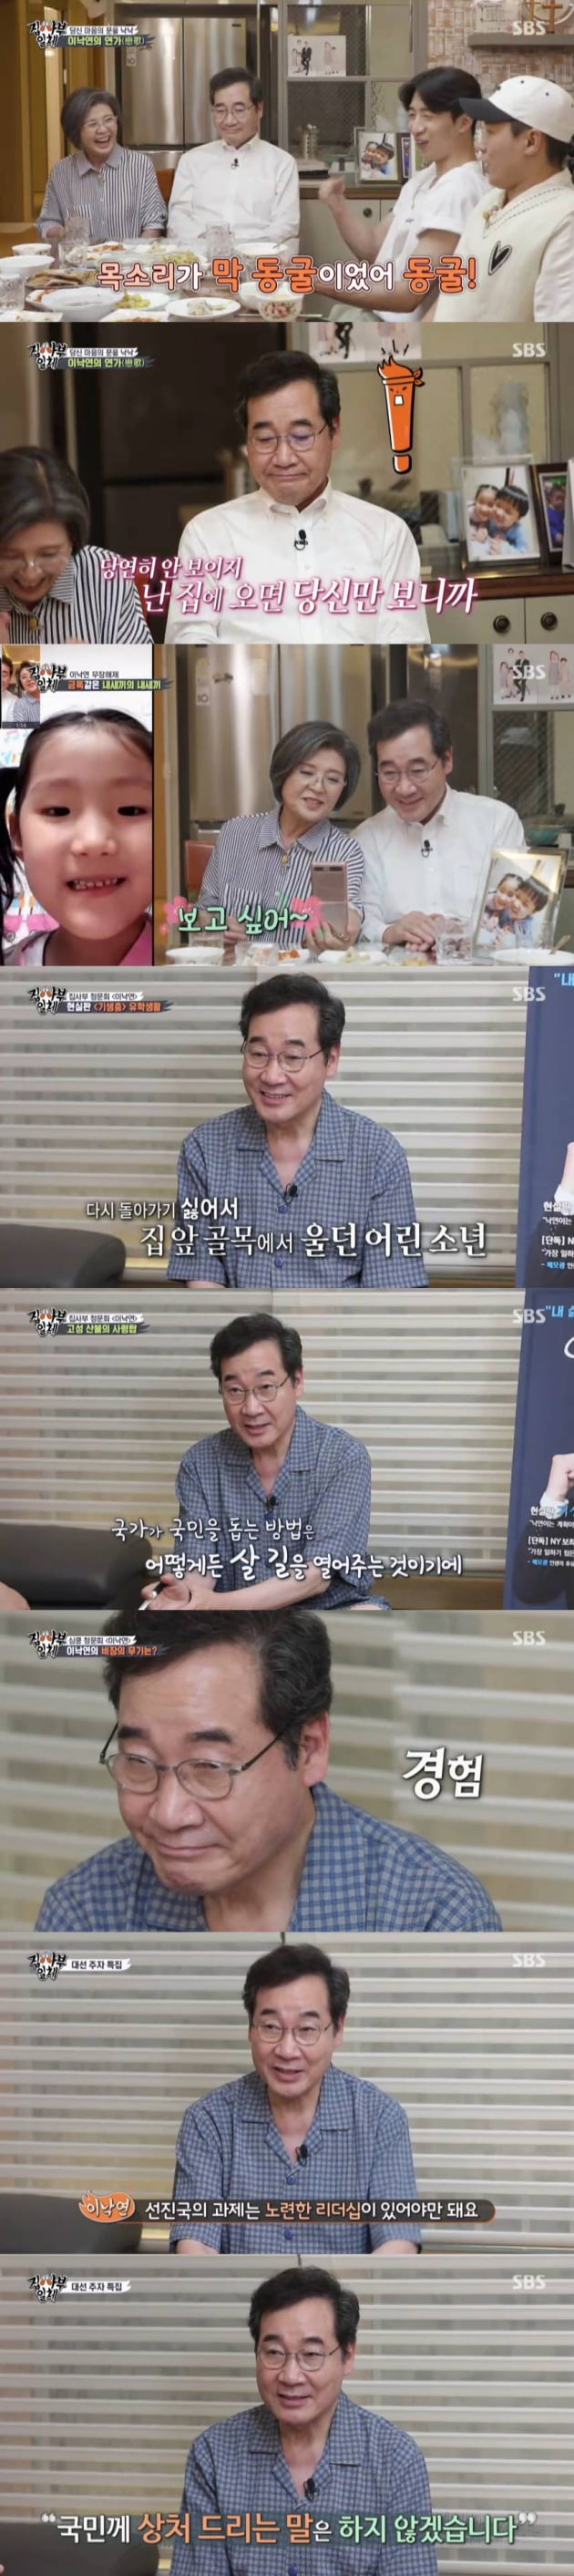 The appearance of former Prime Minister Lee Nak-yeon ended the SBS All The Butlers presidential special.According to Nielsen Korea, a TV viewer rating company, All The Butlers TV viewer ratings in the metropolitan area, which was broadcast on the 3rd, recorded 6.6% and 2049 target TV viewer ratings 1.7%, and the highest TV viewer ratings per minute rose to 7.9%.Earlier, former prosecutor-general Yoon Seok-ryul and Gyeonggi-do Governor Lee Jae-myung appeared as masters in the special feature of All The Butlers presidential election, and Lee Nak-yeon, former Democratic Party leader, appeared as masters on the show.Lee welcomed the members with his wife Kim Sook-hee at his home.He revealed his love story with his wife, revealed his desire for humor, or talked with members in pajamas, revealing the reverse aspect that he could not see.When asked why he decided to run for president, Lee Nak-yeon said, It was responsibility.When I experienced a lot of things nationally, I thought, Id rather have someone do this. The people also expressed a lot of expectations to me, he explained.In the following All The Butlers hearing, Lee Nak-yeon told the story of his study abroad, which was a reality version of the movie parasite.Lee Nak-yeon surprised members when he was 13 years old when he revealed he had started studying abroad at Alone Gwangju without a family.He said, It was very difficult to live alone since junior high school because of the difficult family situation. He was in poor nutrition and was not seen at school at all.Im always lonely, hungry, and without Friend, he recalled.Lee Nak-yeon expressed his gratitude by recalling the teacher who was a great strength during his school days and Friend who gave half of his salary to study after entering college.My youth is a debt, he said. My body is not my body, but my heart is that it is the many people who fed me.I lived in the grace of so many people.Since then, the members have asked about former prosecutor general Yoon Seok-ryul and Lee Jae-myung, governor of Gyeonggi Province, as a common question for the presidential candidate.Asked about the strengths he wanted to bring from the two, Lee Nak-yeon cited the ruggedness of the young seak-ryul and the quickness of Lee Jae-myung.On the contrary, he said, I do not think it is a direct measure, but I have not done government, parliament, central government and local government, internal affairs and diplomacy, and military.He added, I will be much better at humor if I add another thing.Lee Nak-yeon replied confidently, Yes, to the question I am the 20th president of South Korea, and said, It is the closest to the requirements of the leader needed for South Korea now.South Korea has been incorporated into advanced countries this year, and South Koreas task is as advanced as it is, he said. The task of advanced countries must have experienced leadership.Korea depends on trade for 80 percent of India, and we have to do diplomacy for India, but Im the only one who has done it, he said.Finally, Lee Nak-yeon asked, If I become president, I will never do it. I will not say anything that hurts the people.I will not give such a wound, such as making a ridiculous remark or making a ridiculous mess that will doubt my personality. Im disappointed that our countrys face is that much, he added.The special feature of All The Butlers, which featured former prosecutor general Yoon Seok-ryul, Gyeonggi Province Governor Lee Jae-myung and former Democratic Party leader Lee Nak-yeon as masters, focused on keywords related to them through the All The Butlers hearing, and provided opportunities to listen to political philosophy and convictions, including the story of their lives.On the other hand, at the end of the broadcast, Dr. Oh Eun-young, Park Jong-bok, real estate consultant, and Han Moon-cheol lawyer were expected to appear as a special feature of crisis escape.